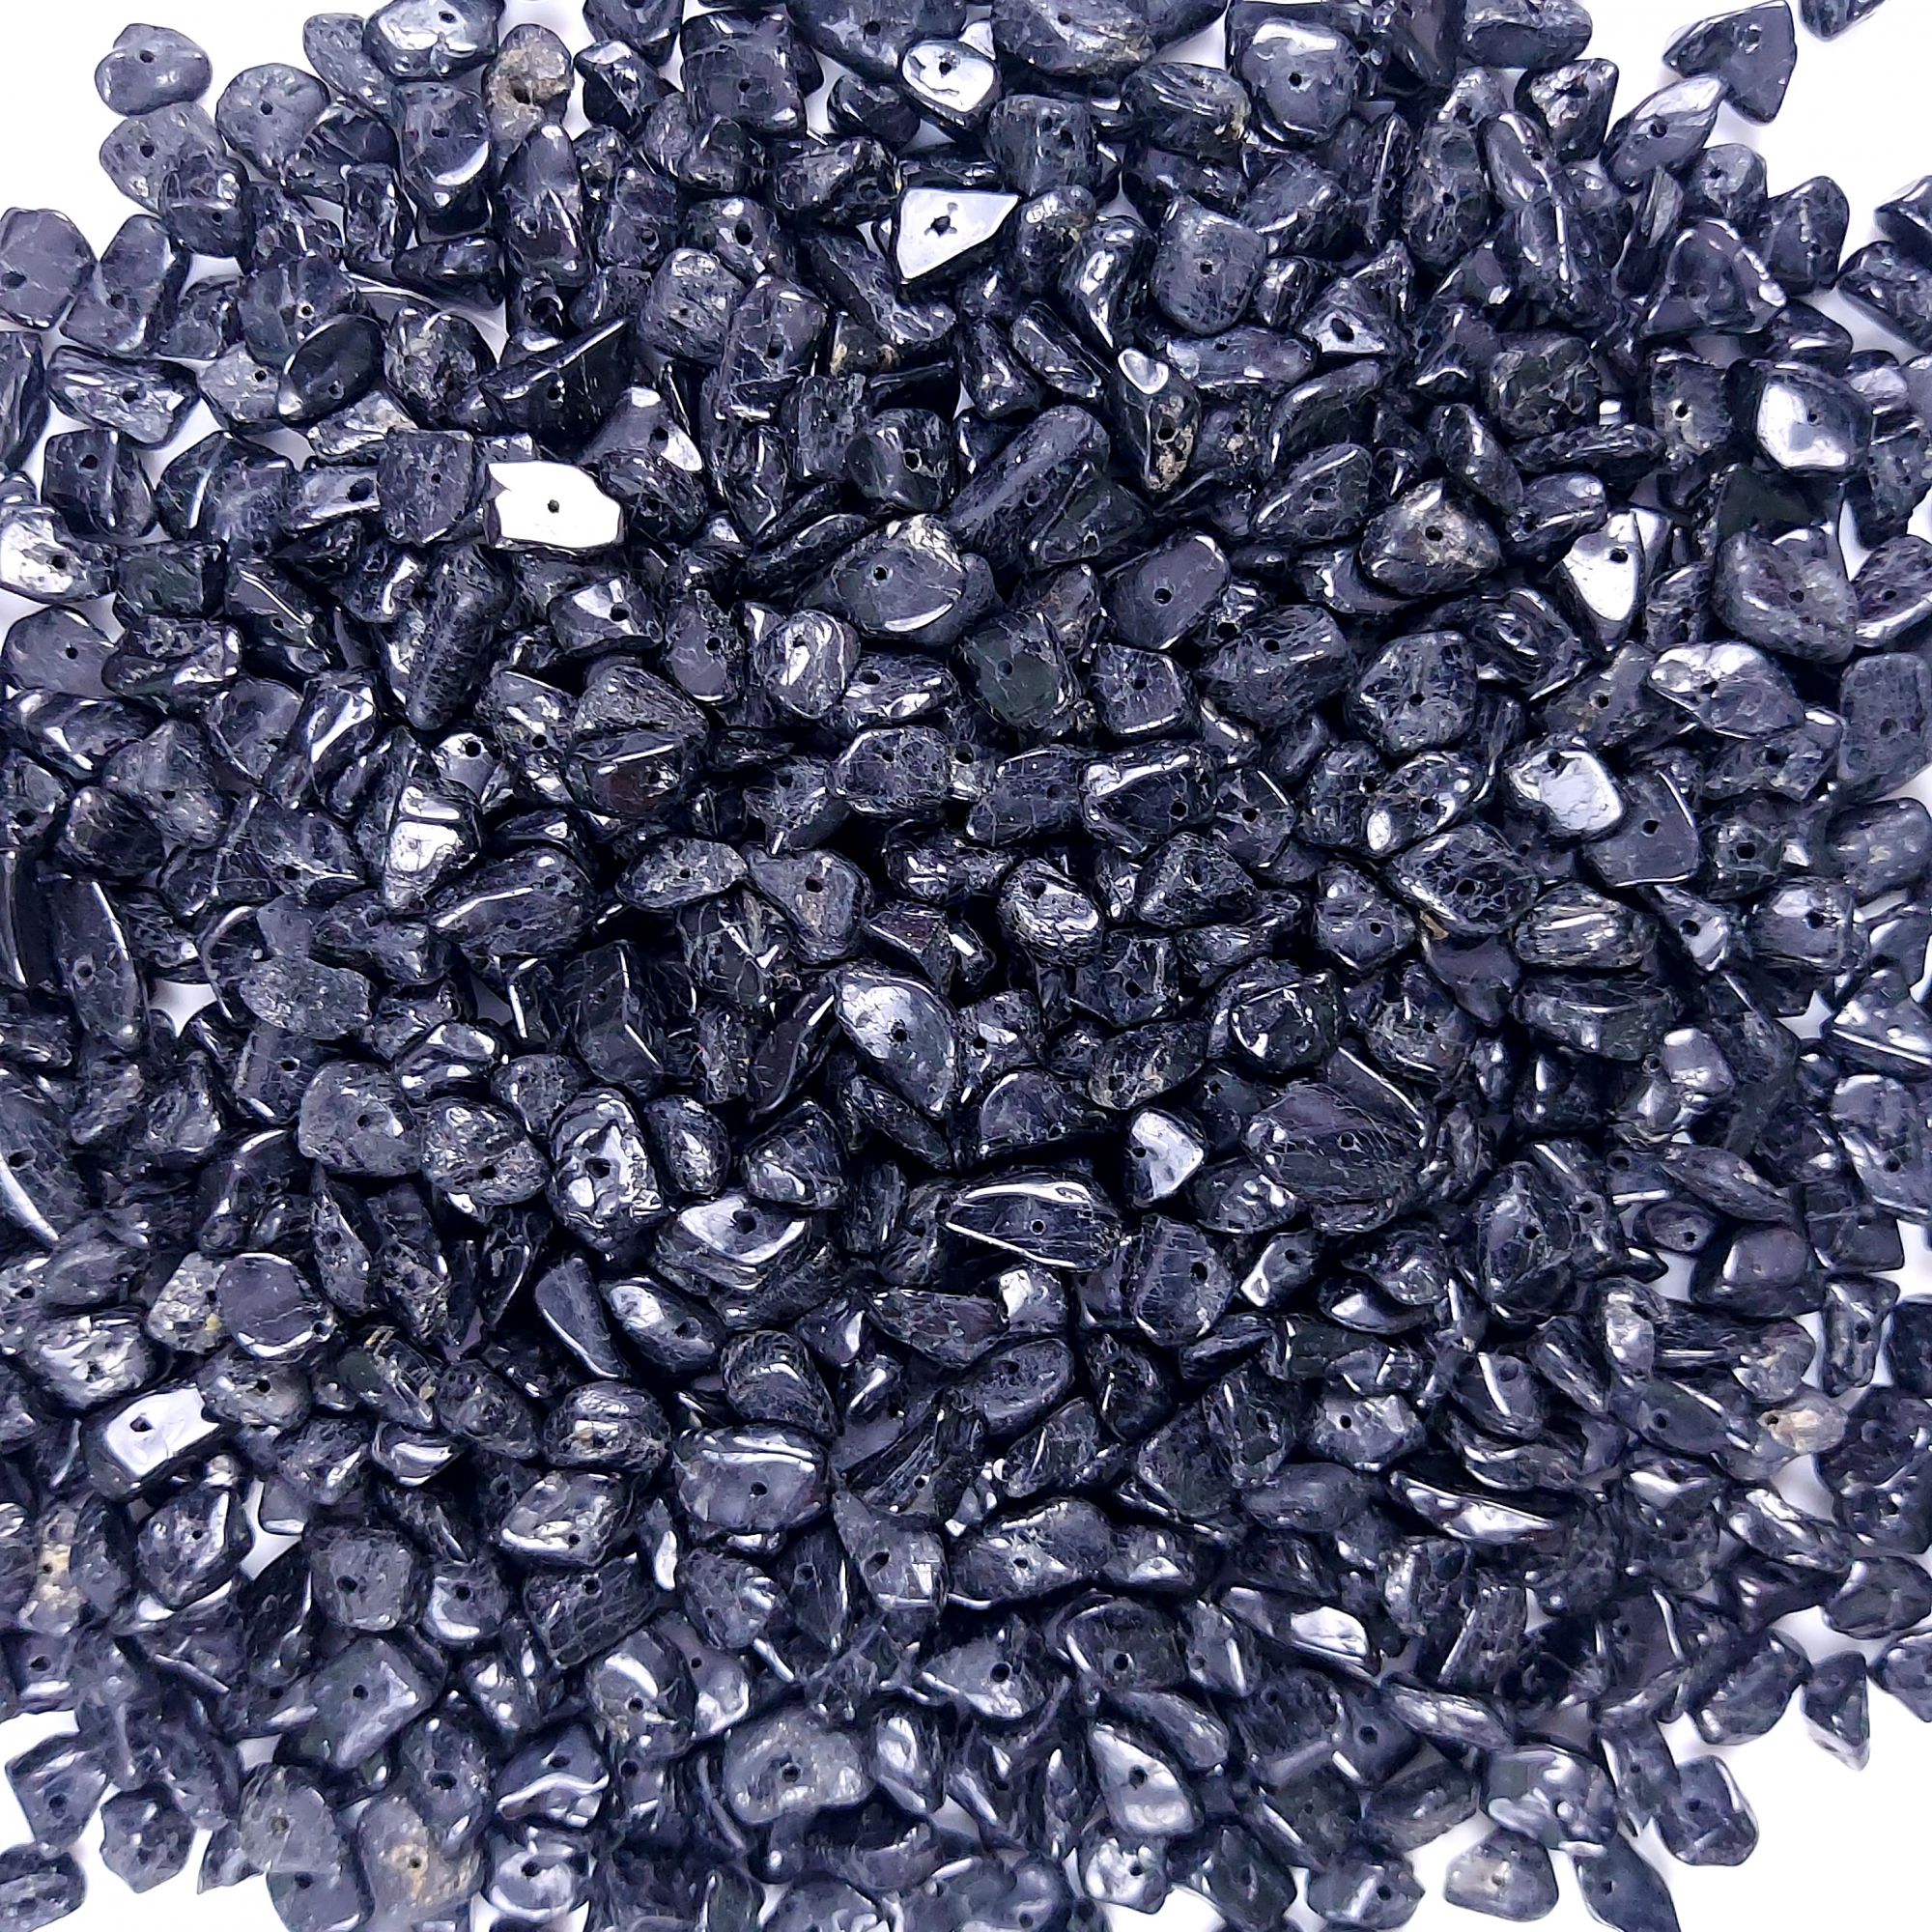 784Pcs 963Cts  Natural Black Tourmaline Gemstone Chips Uncut Beads for Jewelry Making Center Drill Loose Gemstones Nuggets Chips Smooth Beads Bracelet Gift for Her 9x4 6x4mm#G-407